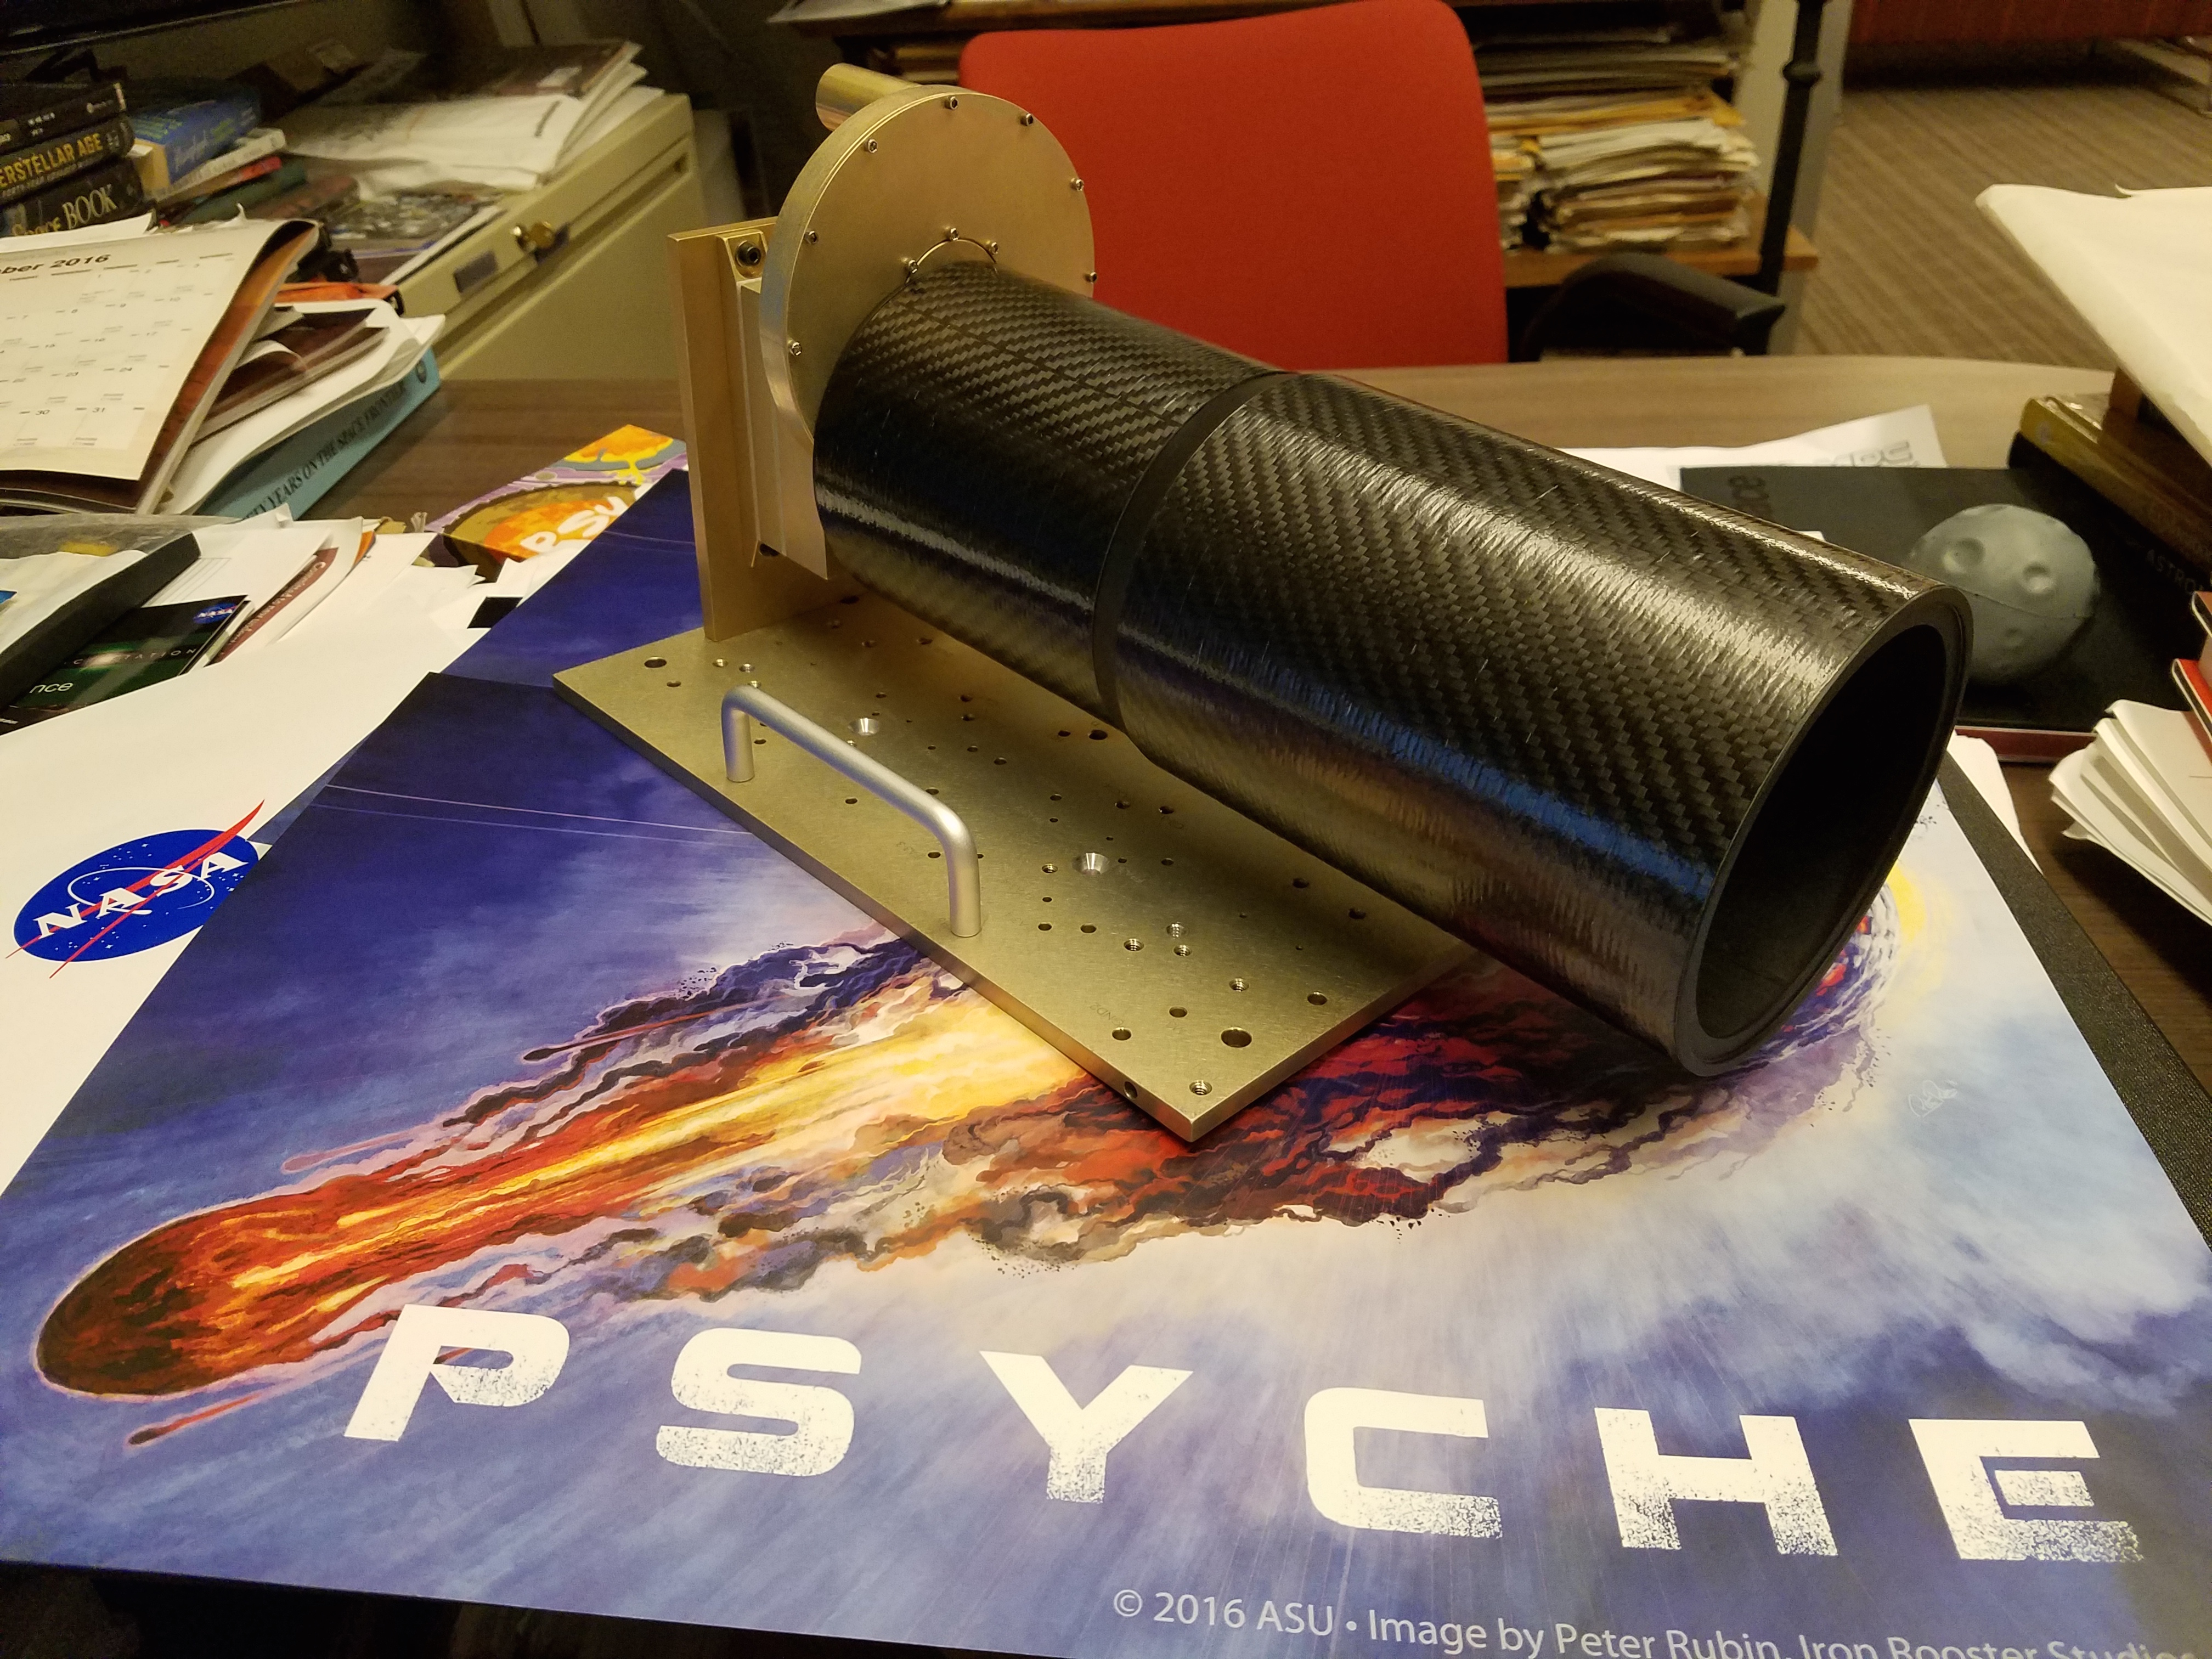 Psyche mission multispectral imager